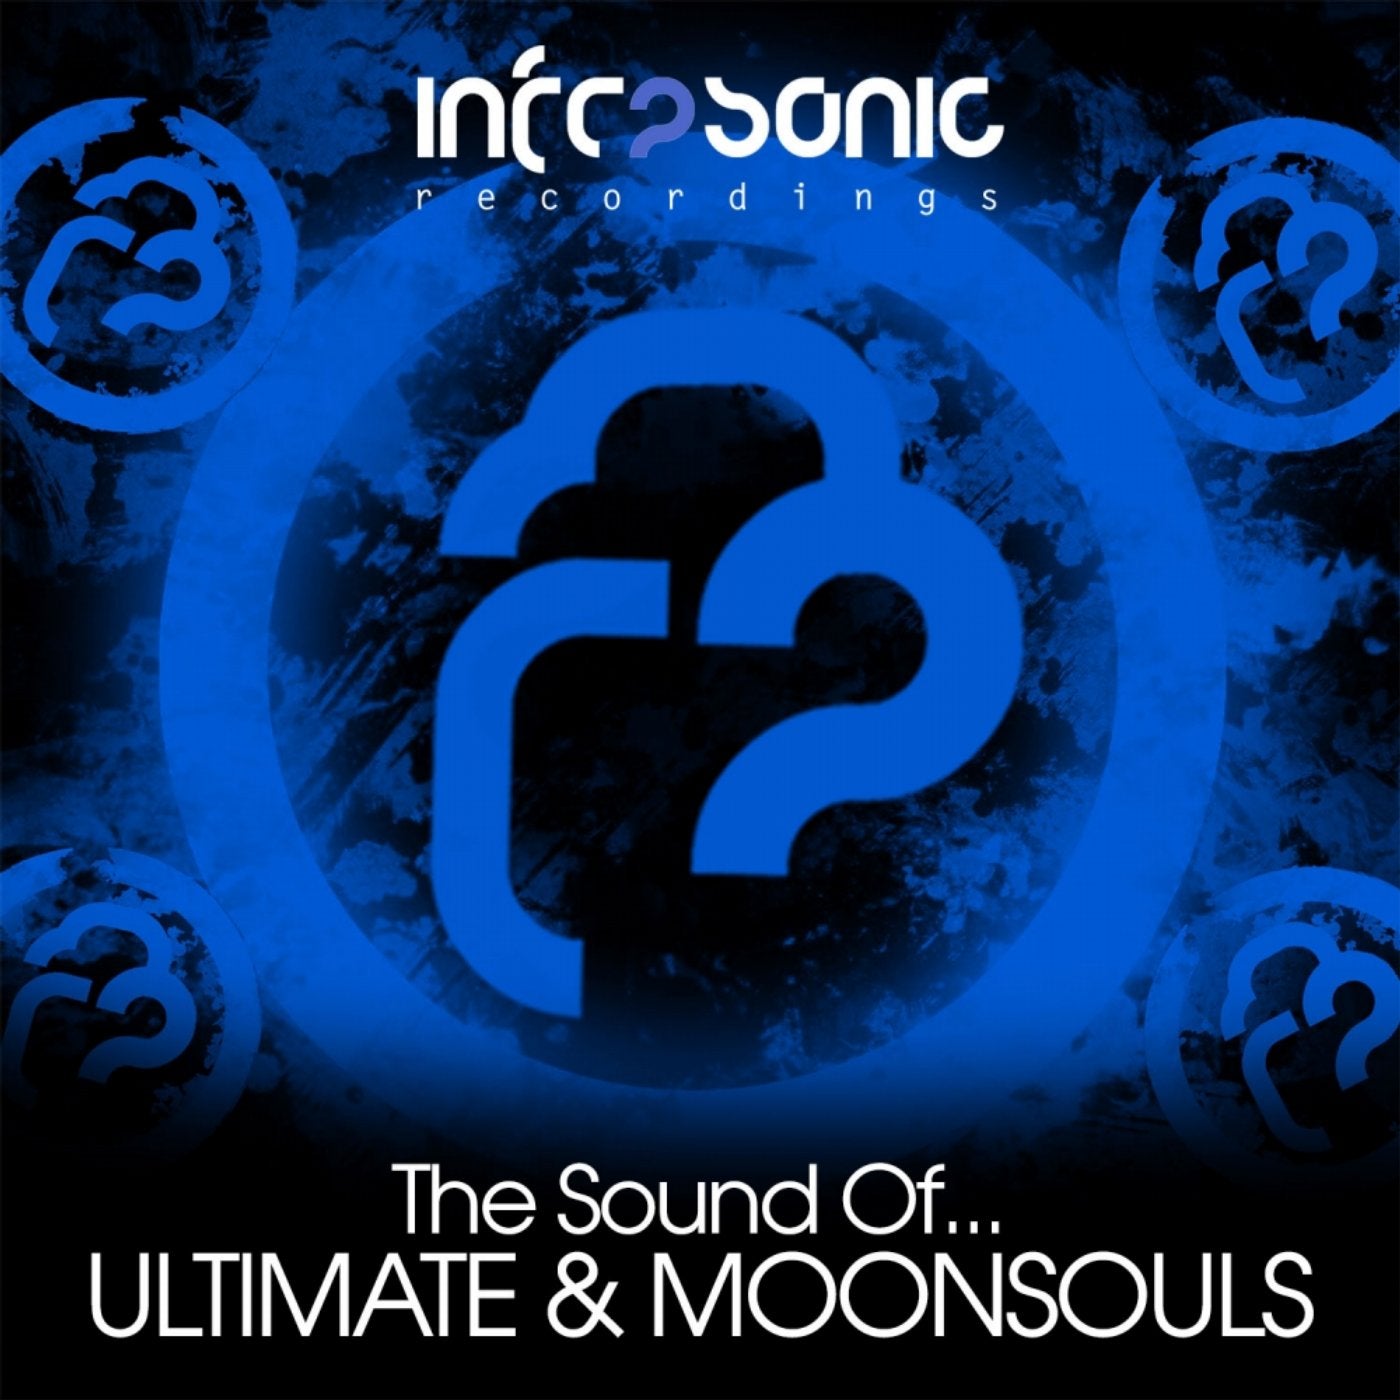 The Sound Of: Ultimate & Moonsouls